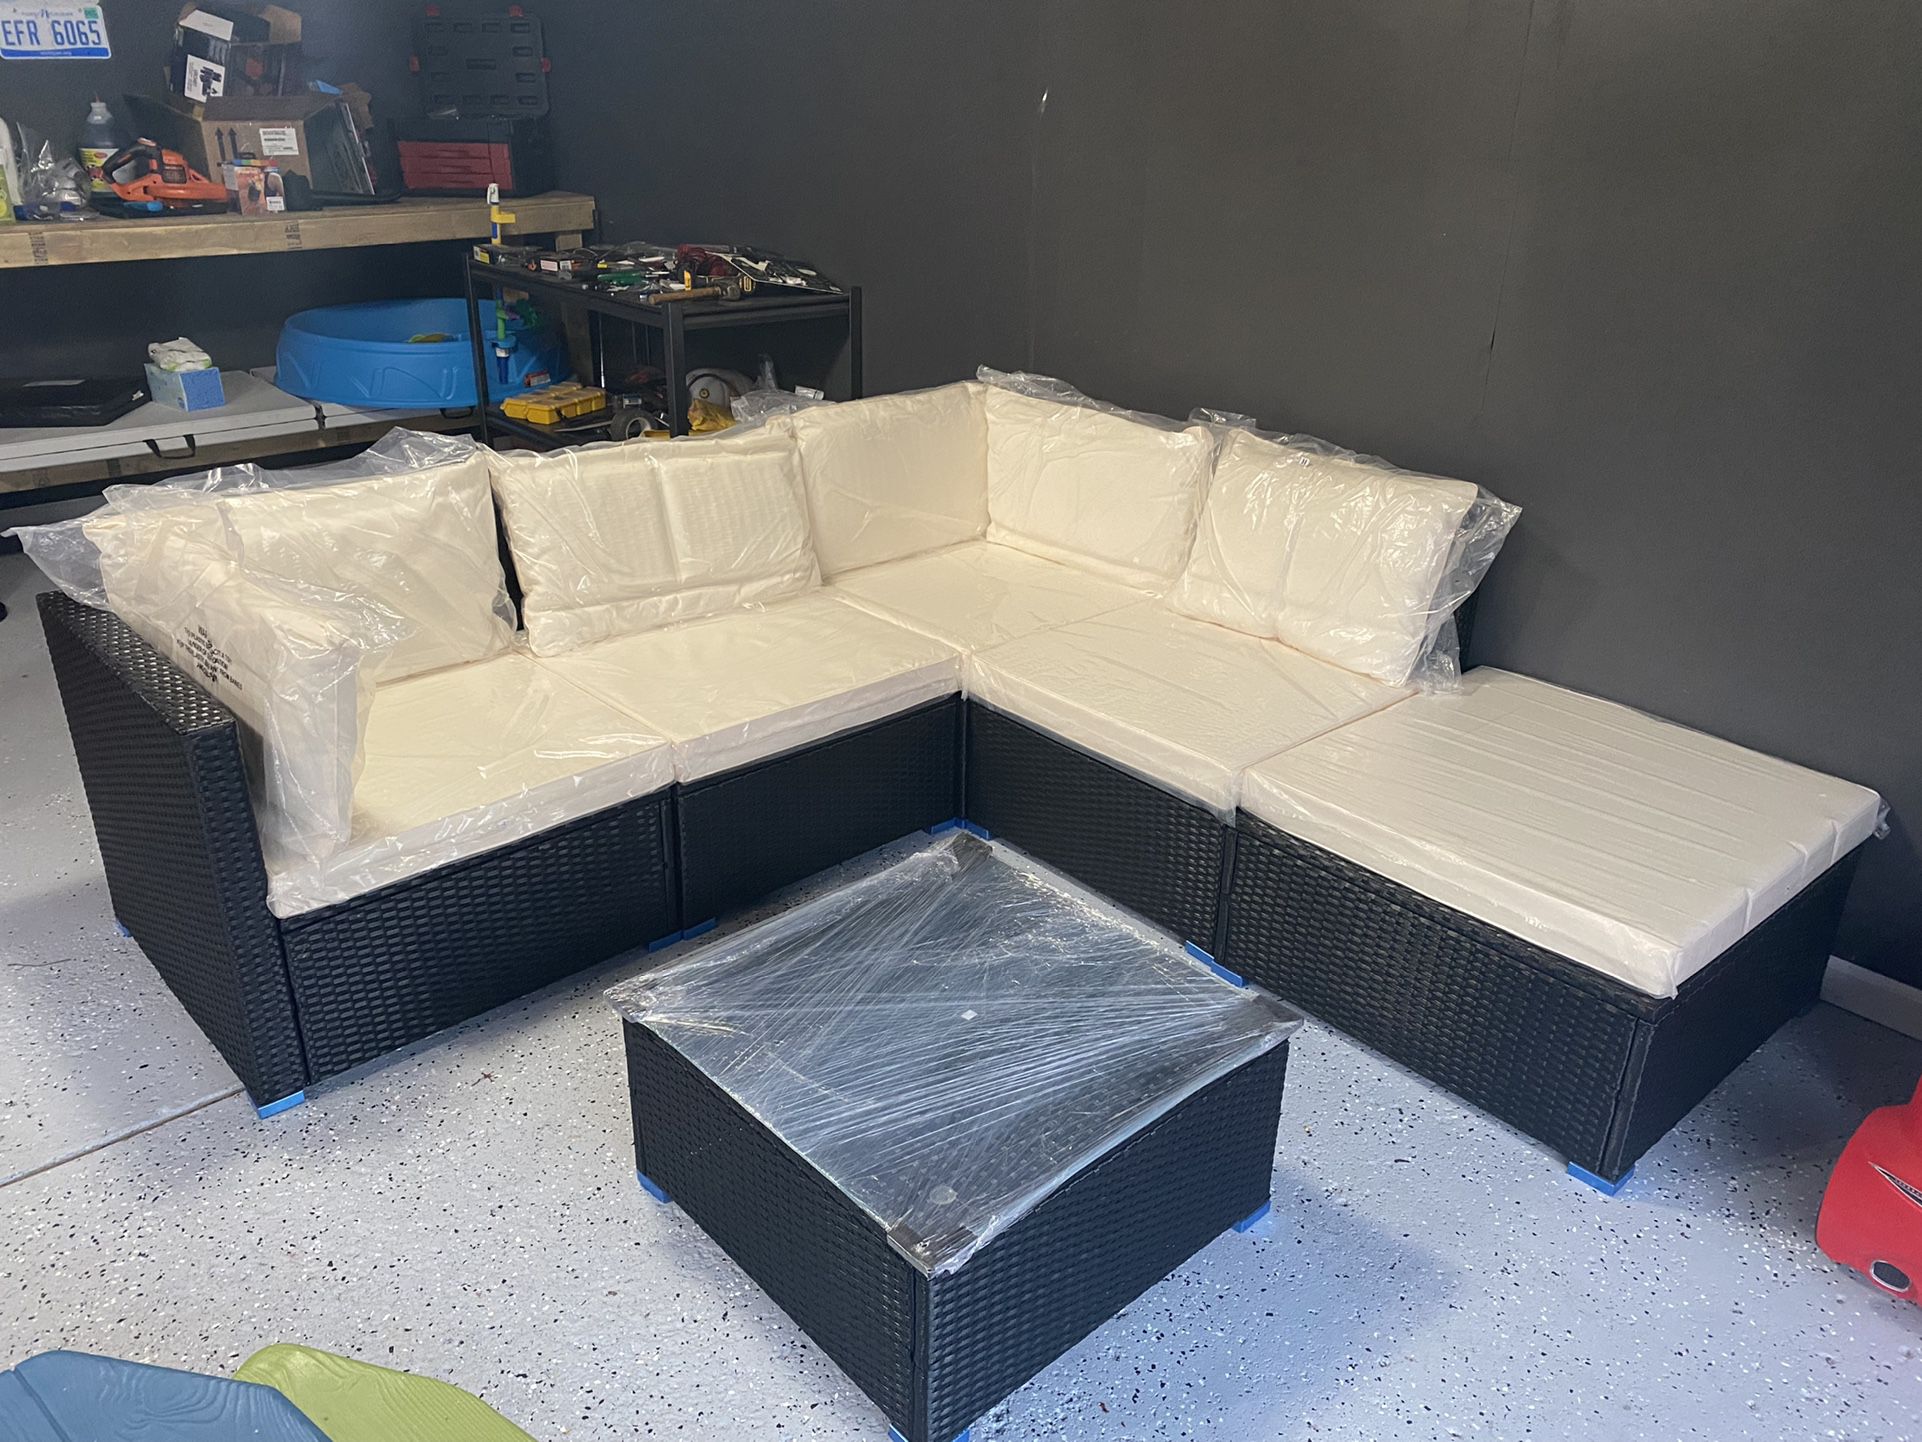 Brand New Never Used Sunfurnn Black Wicker Outdoor Sectional Sofa Set With Glass Table